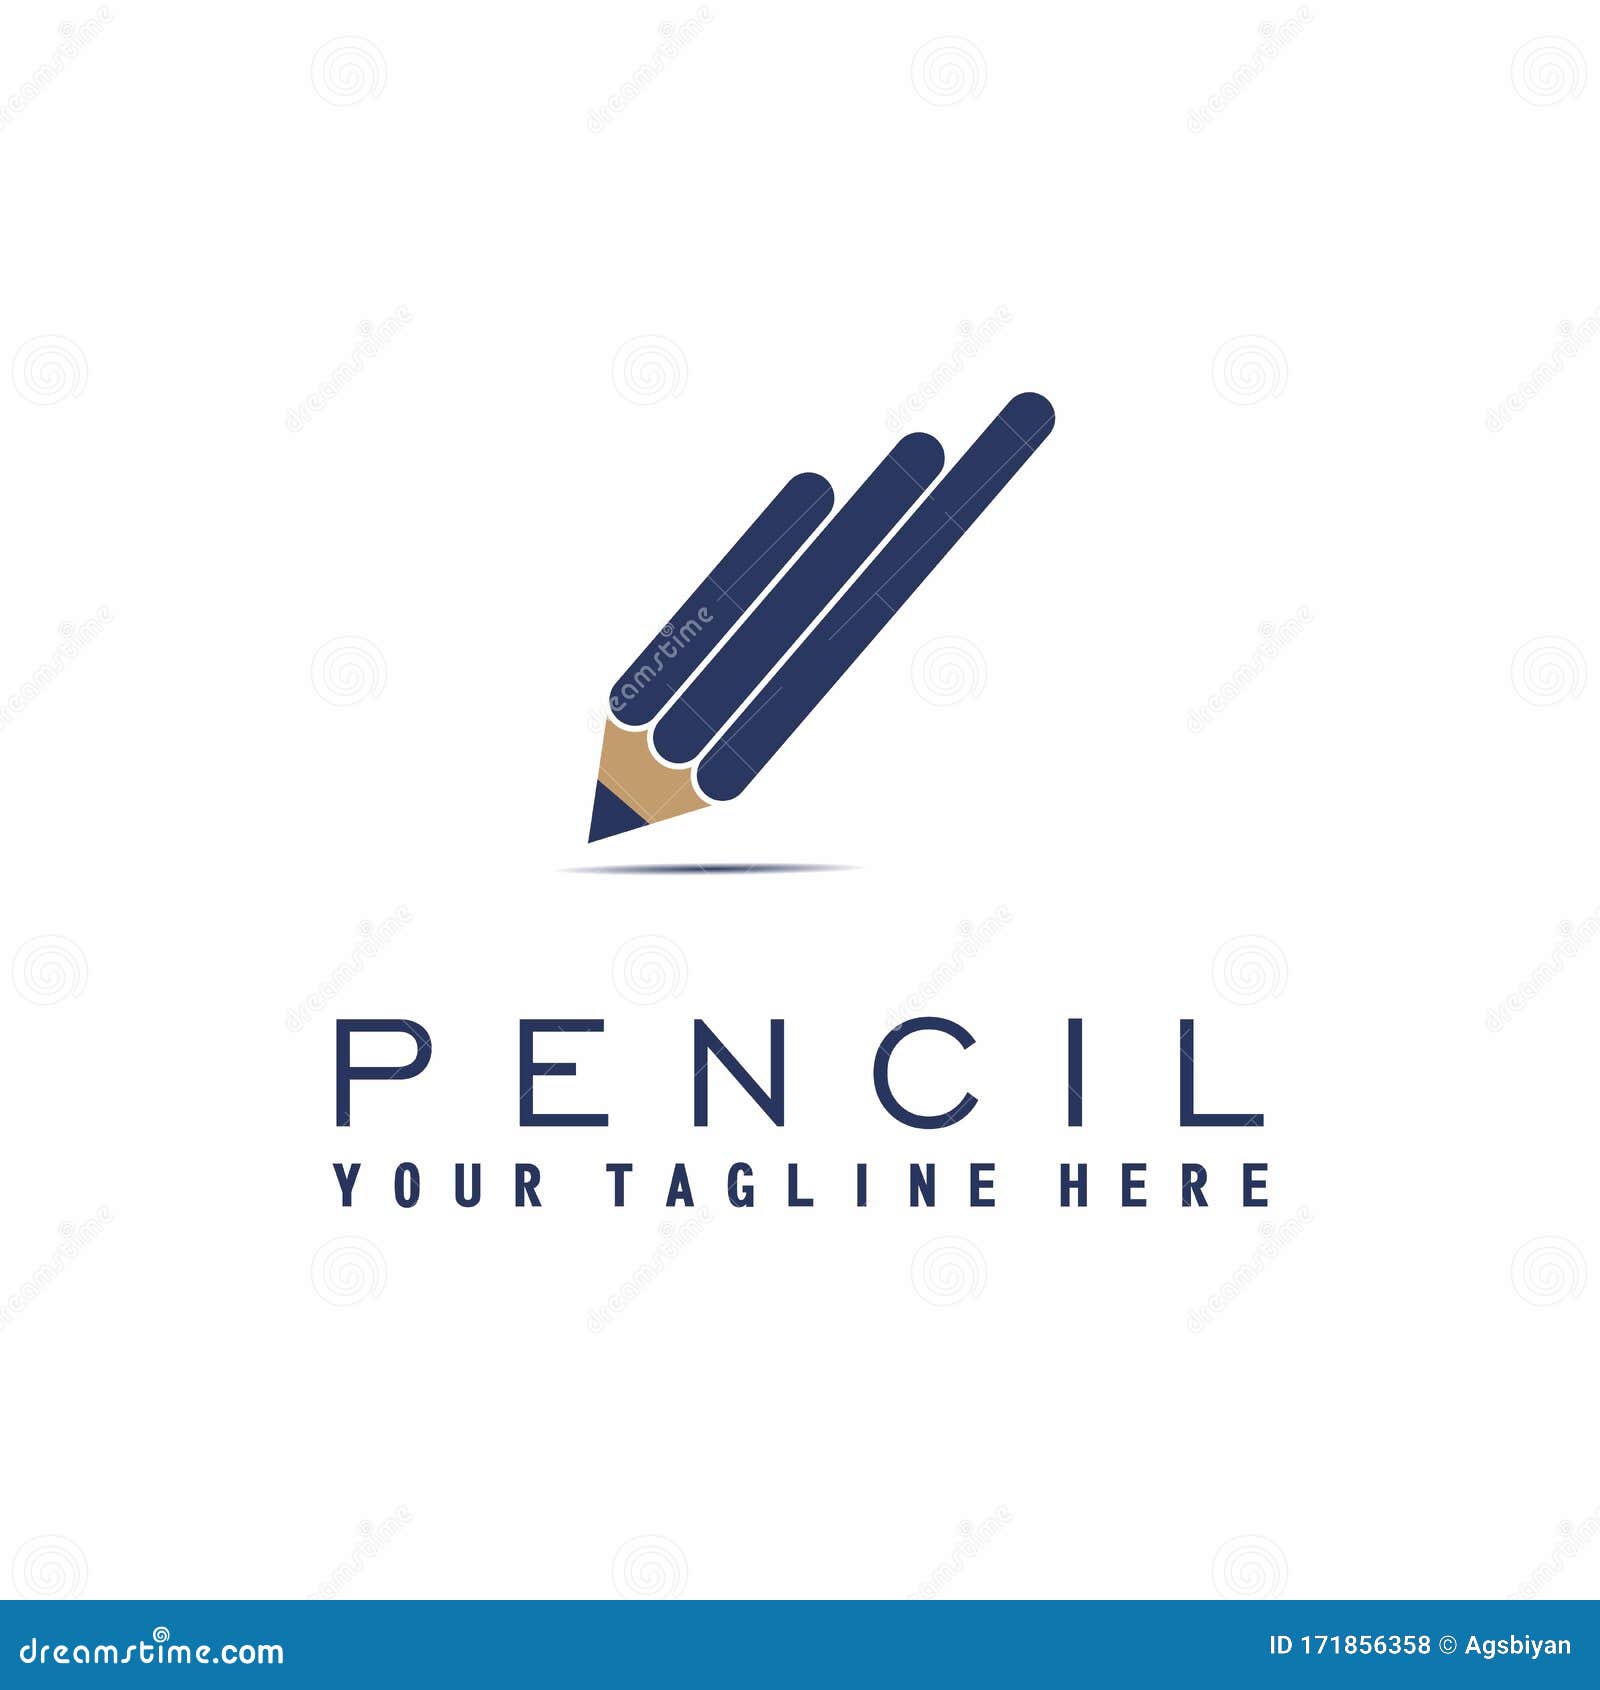 Pencil Shape Design that Looks Simple but Attractive Stock Vector ...